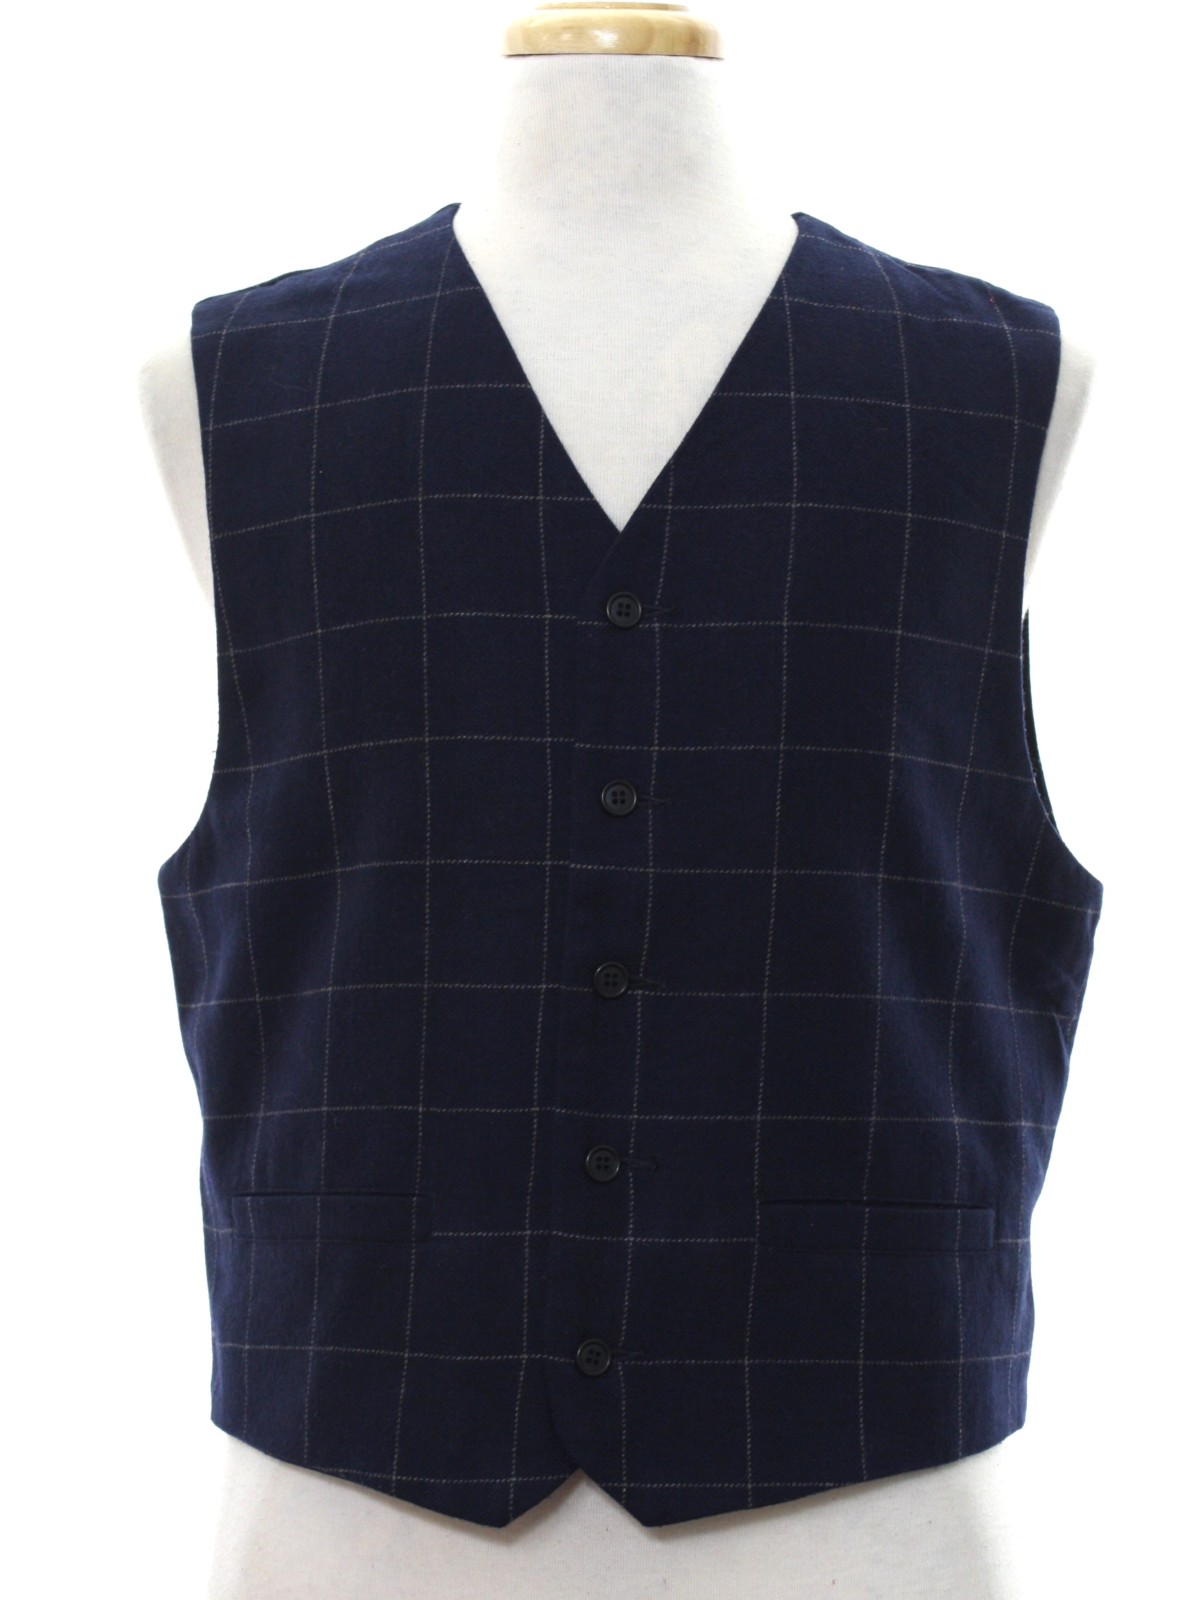 1980's Vintage Gap Vest: Late 80s or Early 90s -Gap- Mens midnight blue ...